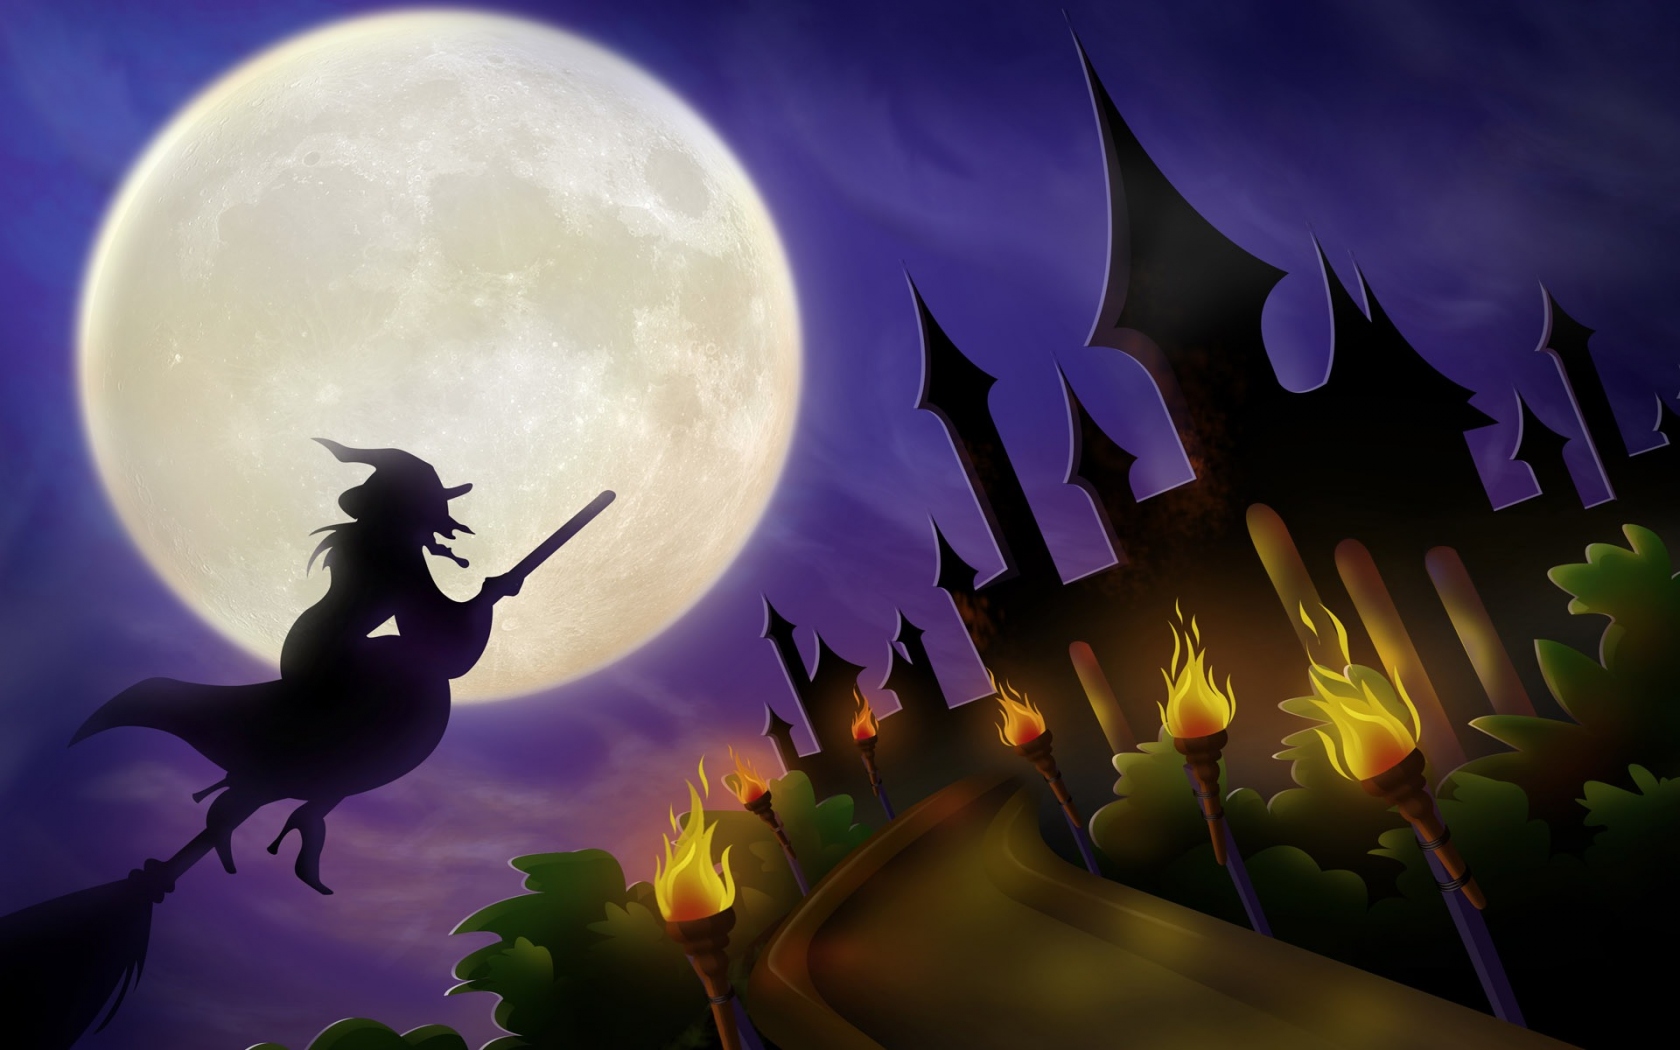 General 1680x1050 vector art silhouette Halloween moonlight witch witch's broom castle torches full moon broom fantasy art